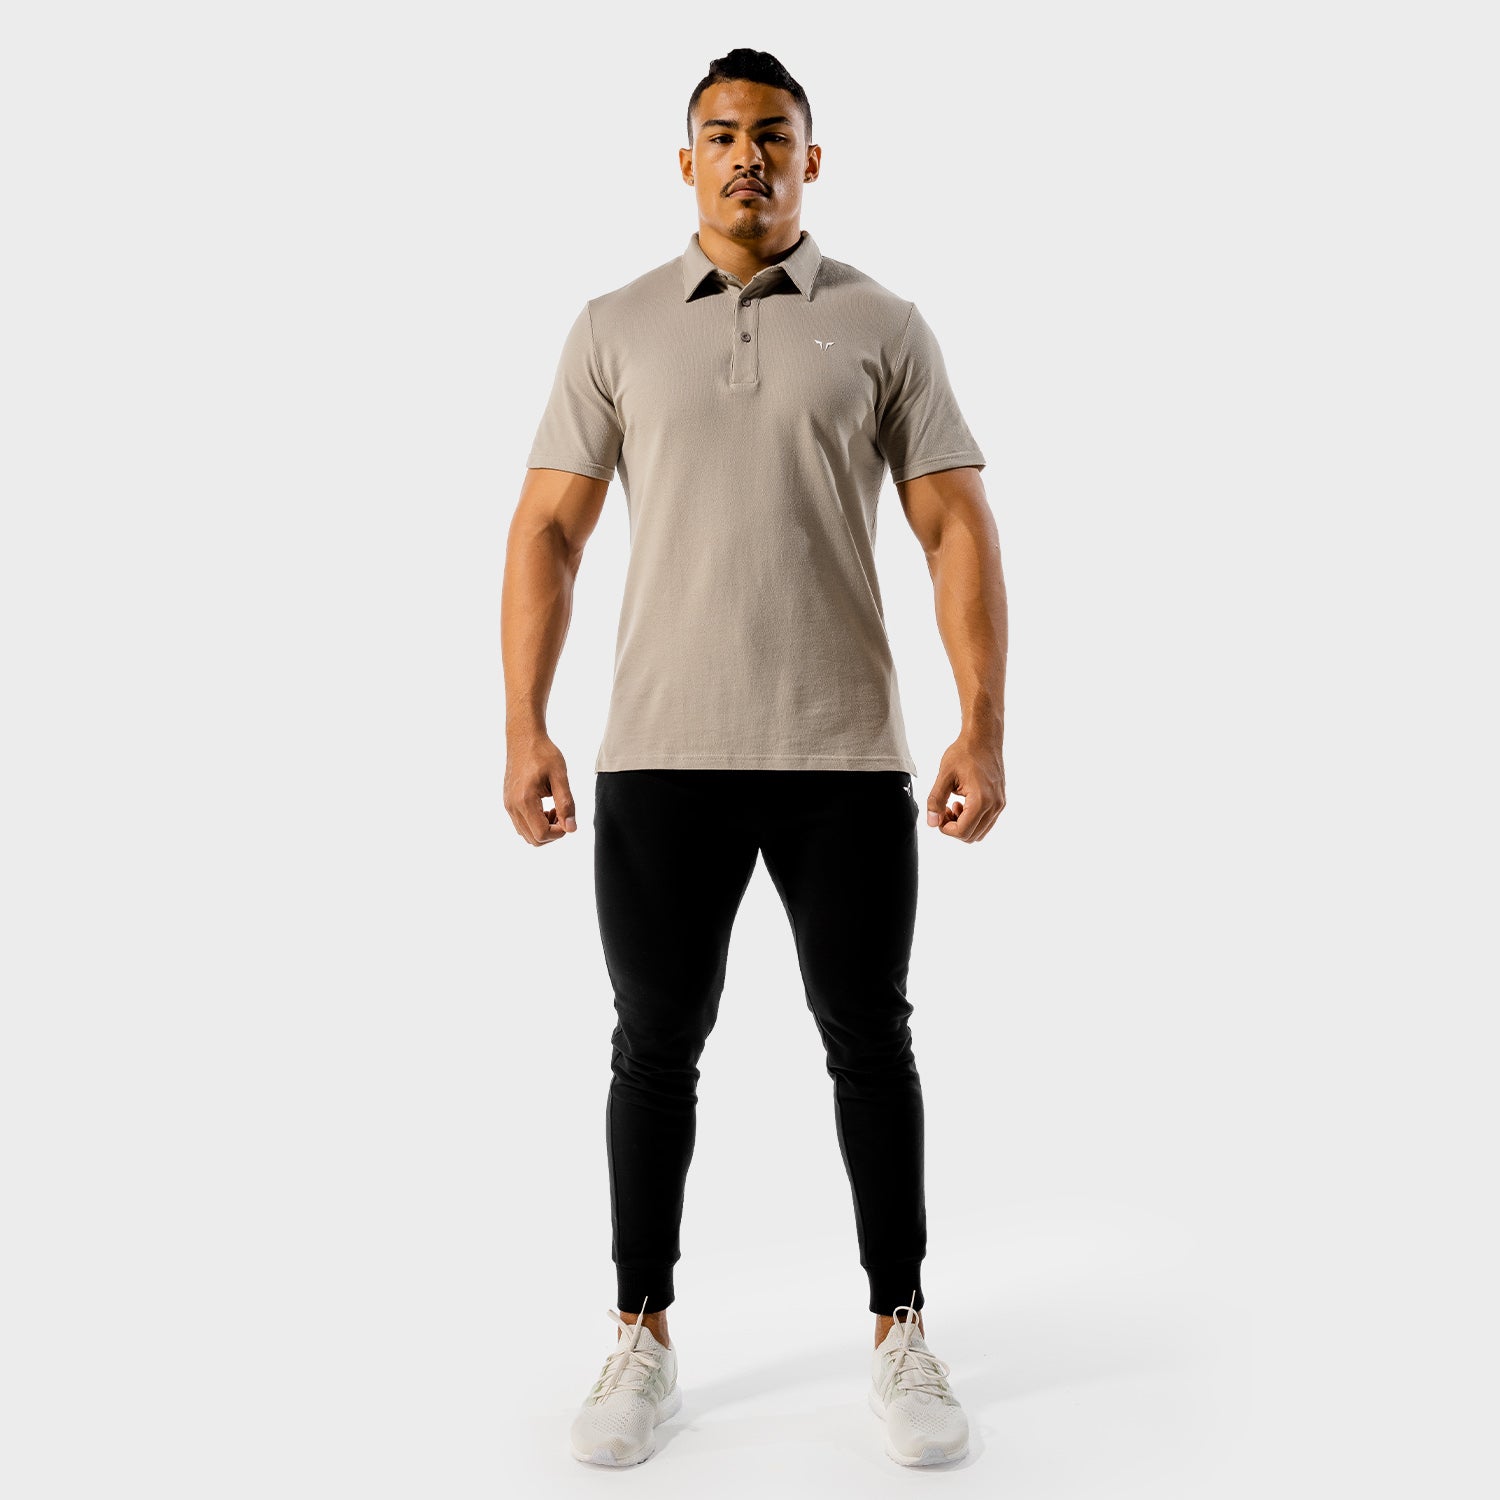 squatwolf-gym-wear-core-tee-polo-grey-workout-shirts-for-men